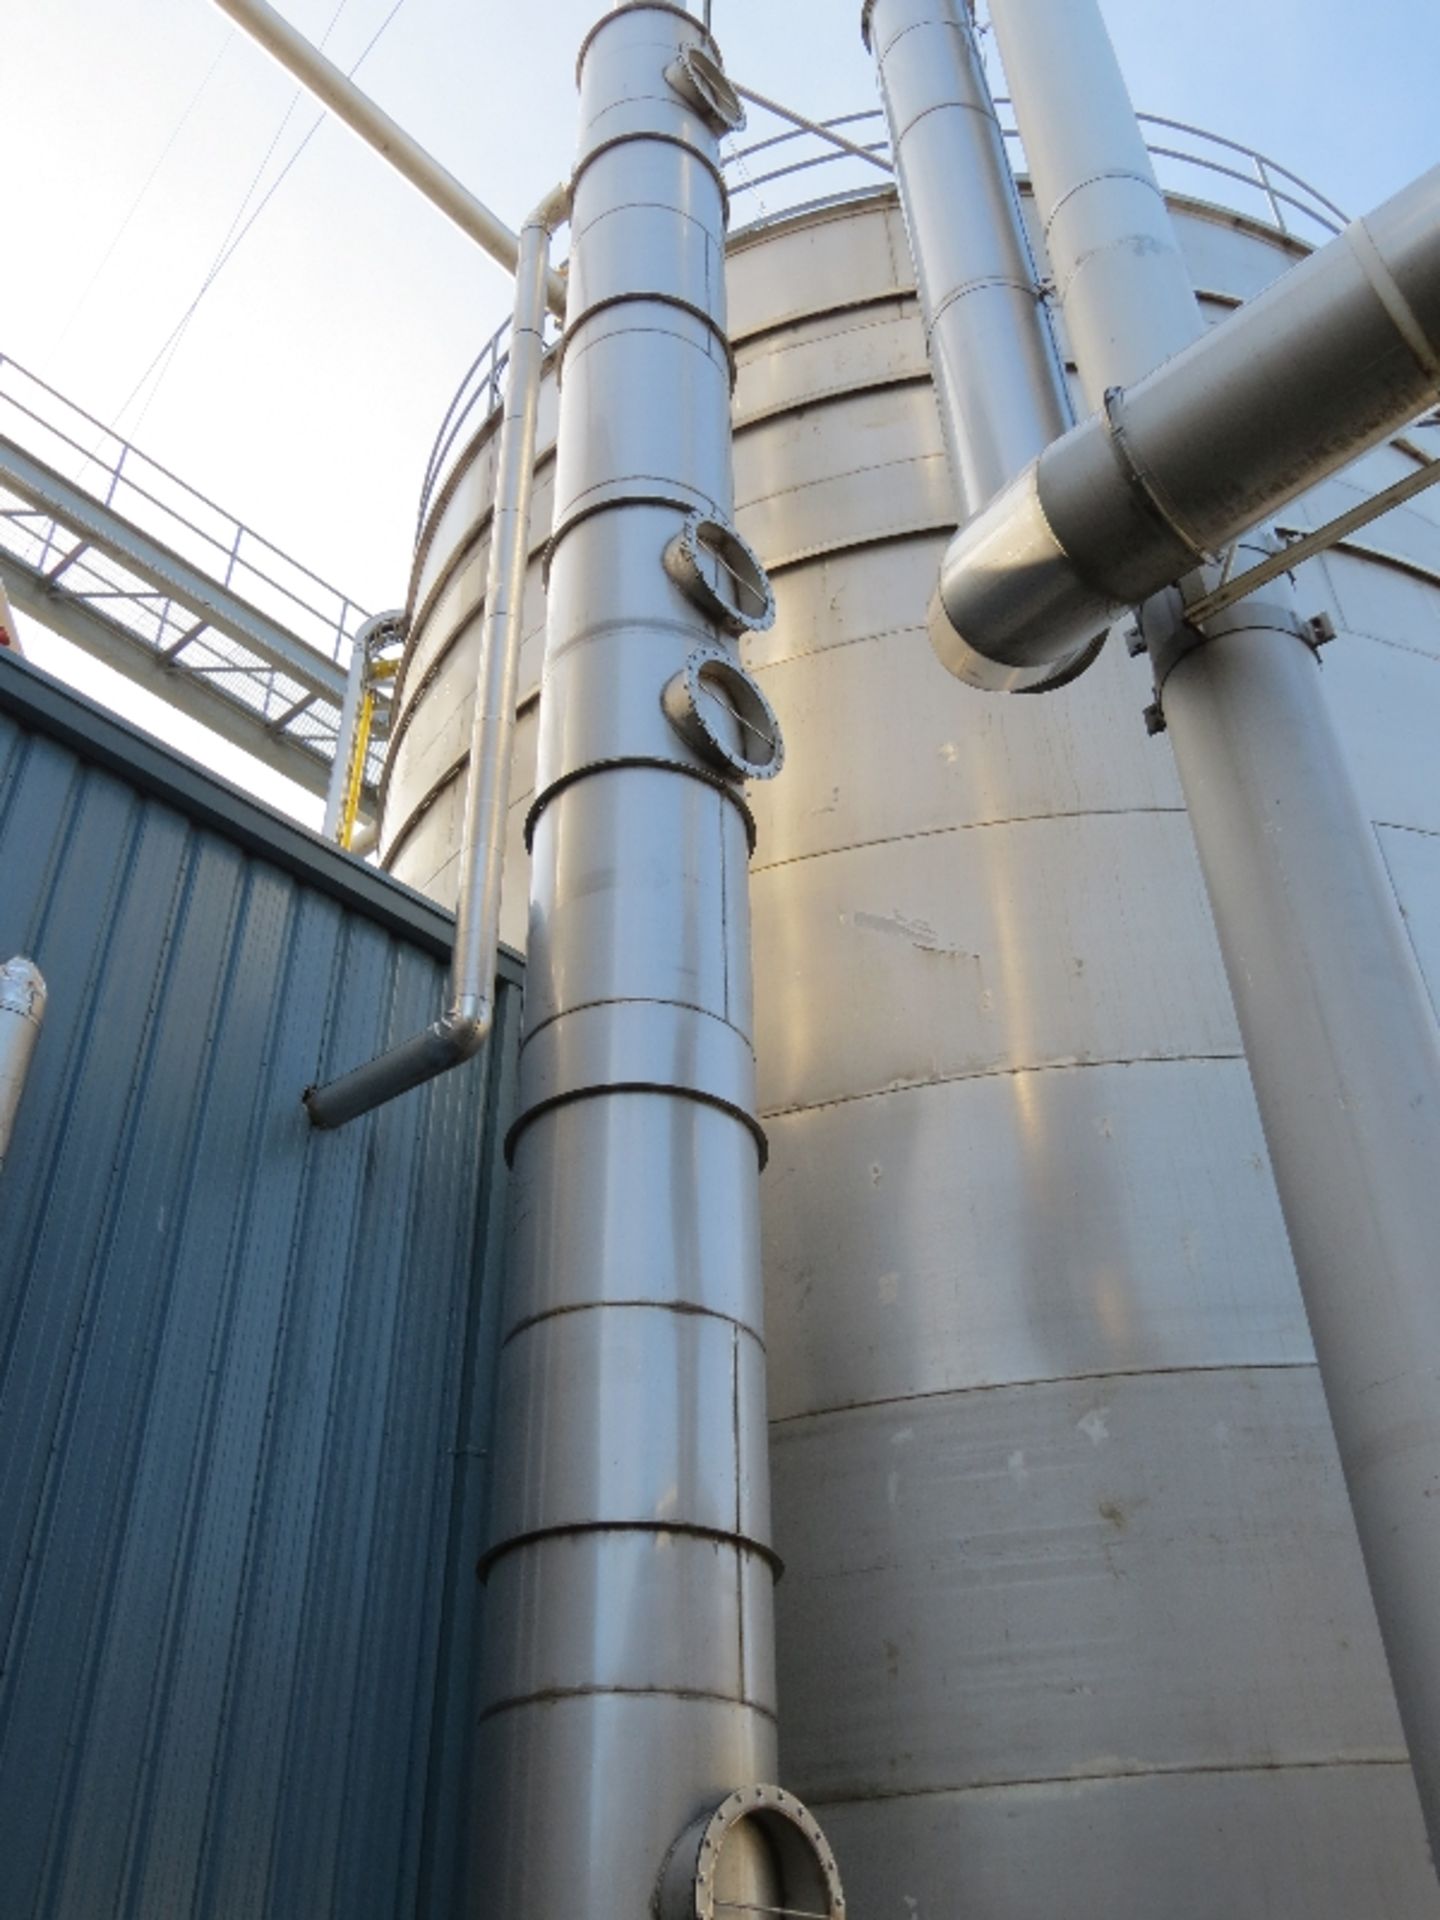 C02 Scrubber with Blowers and Stainless Steel Column and Exhaust Stack - Image 15 of 22